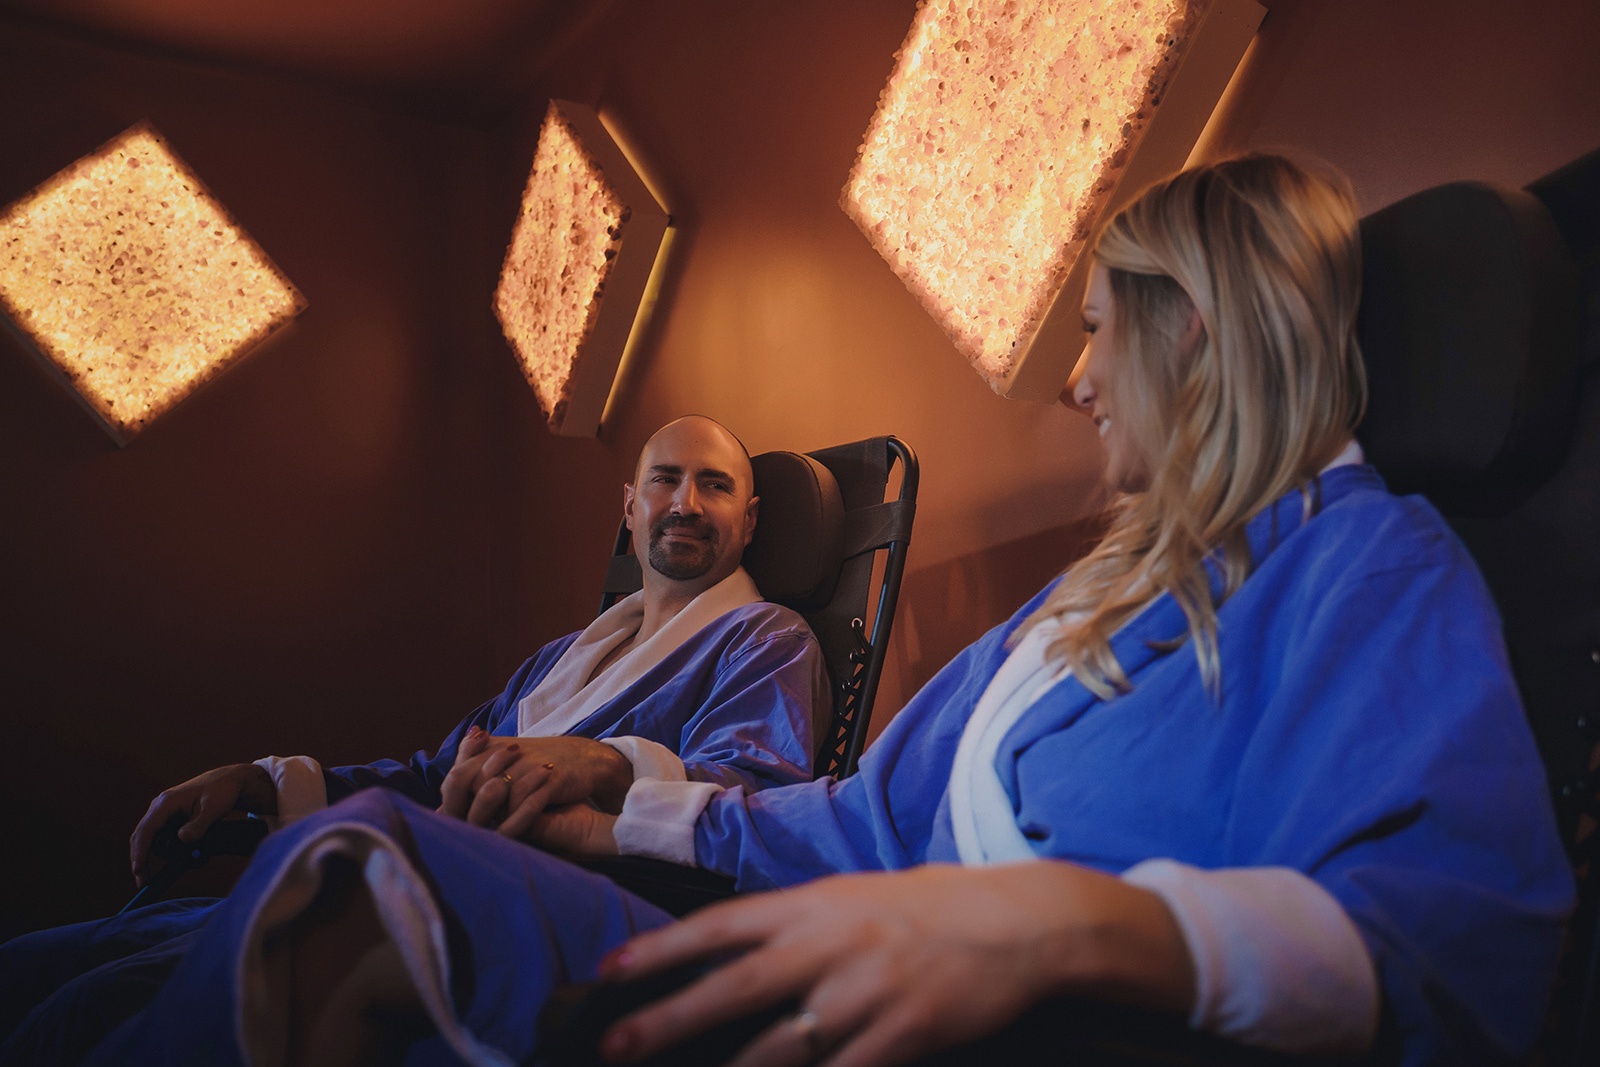 One Woman And One Man In Blue Robes Holding Hands Smiling At Each Other In A Salt Therapy Room With Diamond Salt Stone Wall Décor At The Unwind Westclox Peru Ilinois